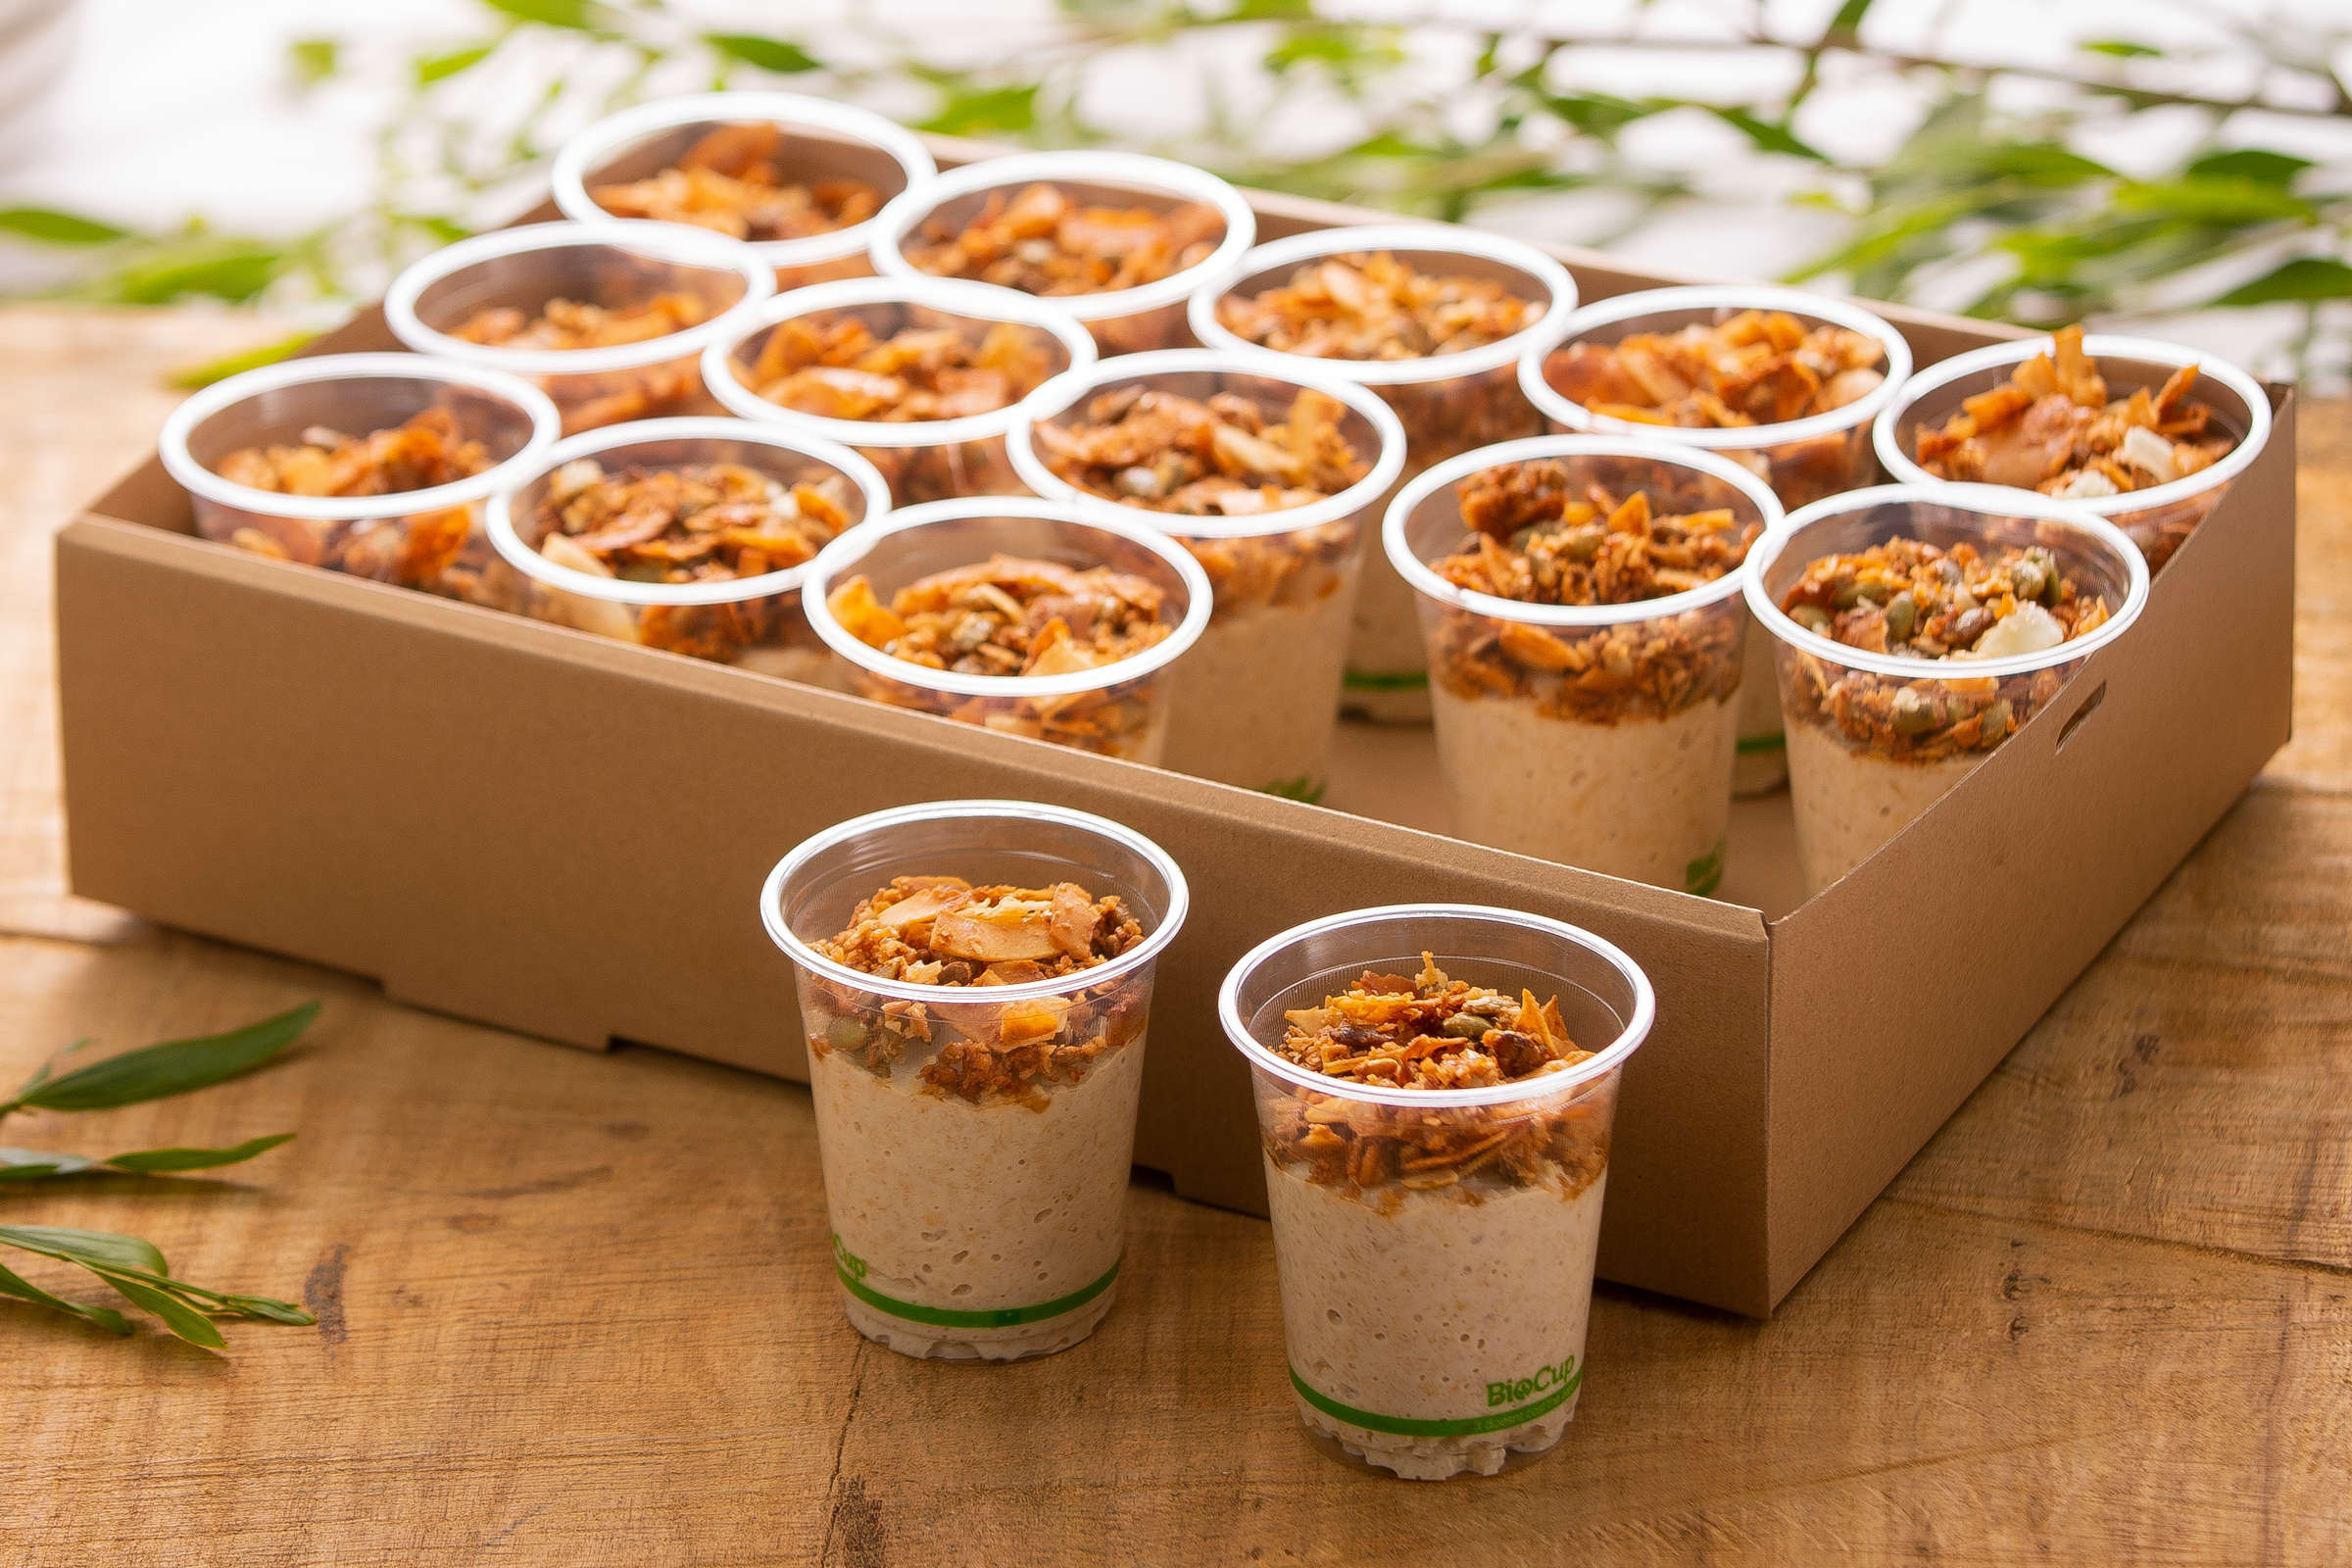 Bircher muesli cups with coconut and seed crunch, and poached seasonal fruit. Credit: Richard Jupe.